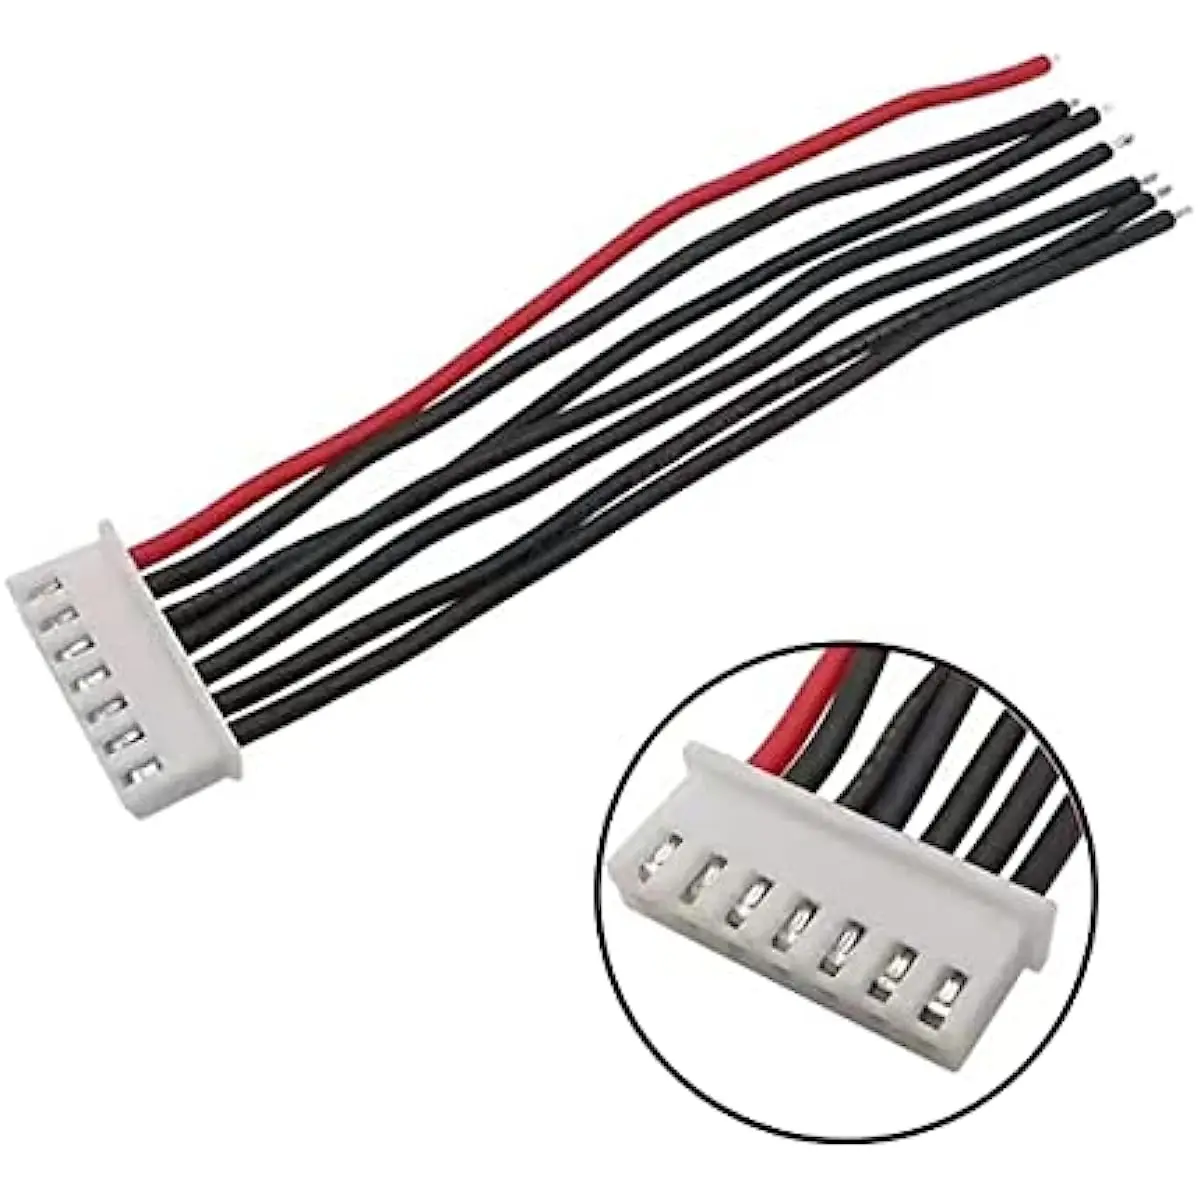 2S 3S 4S 5S 6S Lipo Battery Balance Charger Cable JST XH Connector Adapter Plug or RC Charger(2-Each,10pcs in Total) images - 6